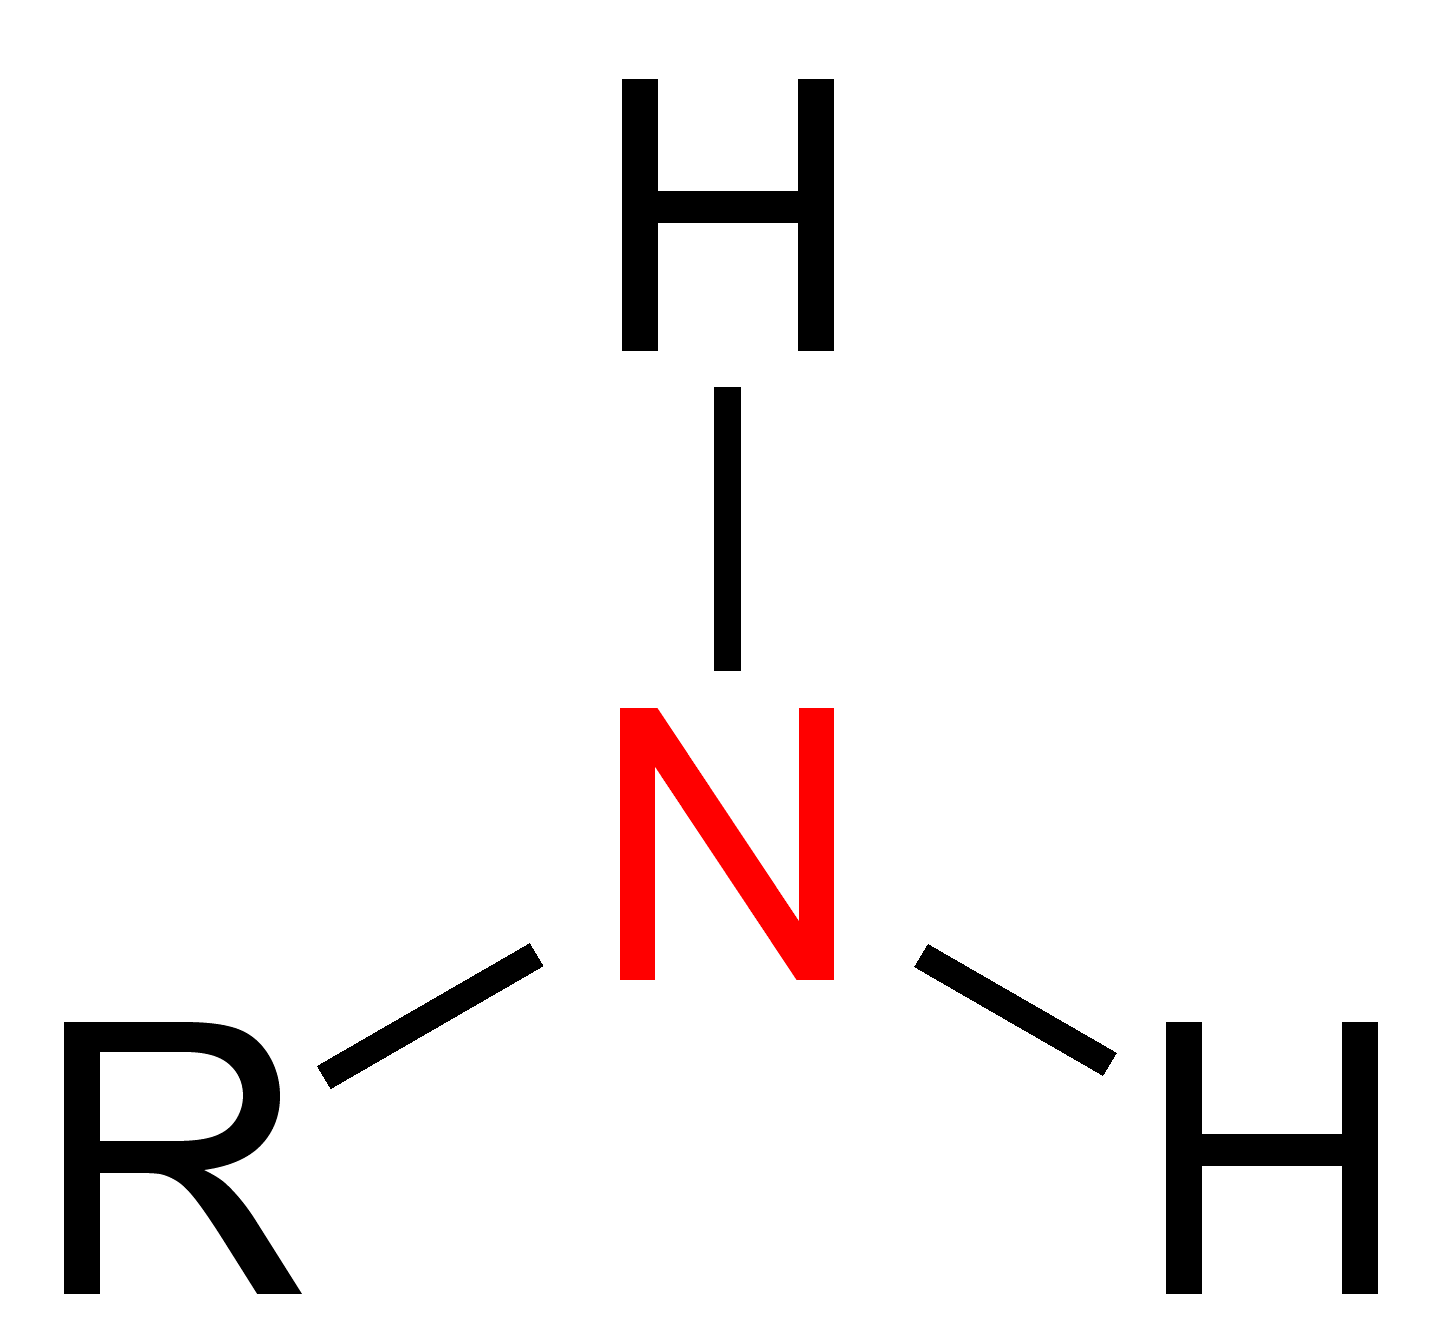 Image result for AMINE (http://upload.wikimedia.org/wikipedia/commons/9/90/Prim._Amine_Structural_Formulae_V.1.png)